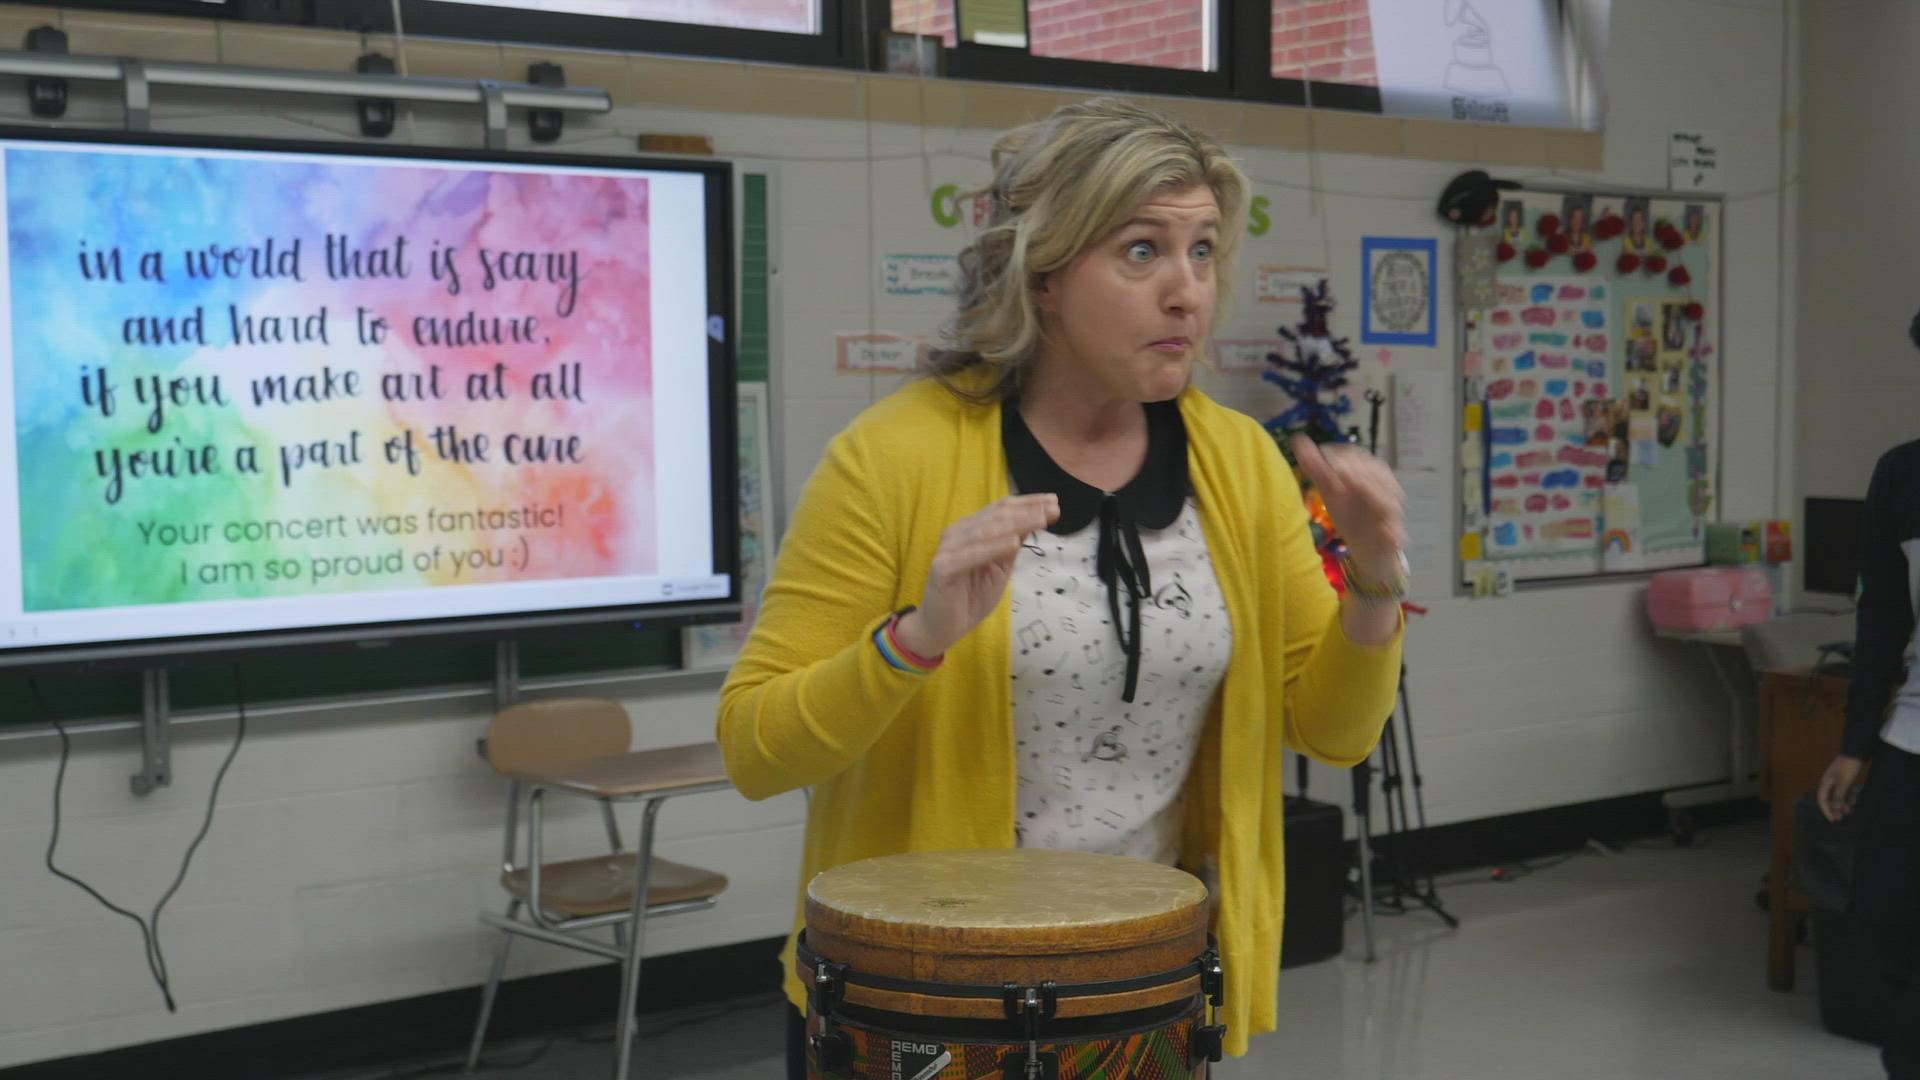 Katie Silcott was nominated by her students for the Grammy's Music Educator Award.